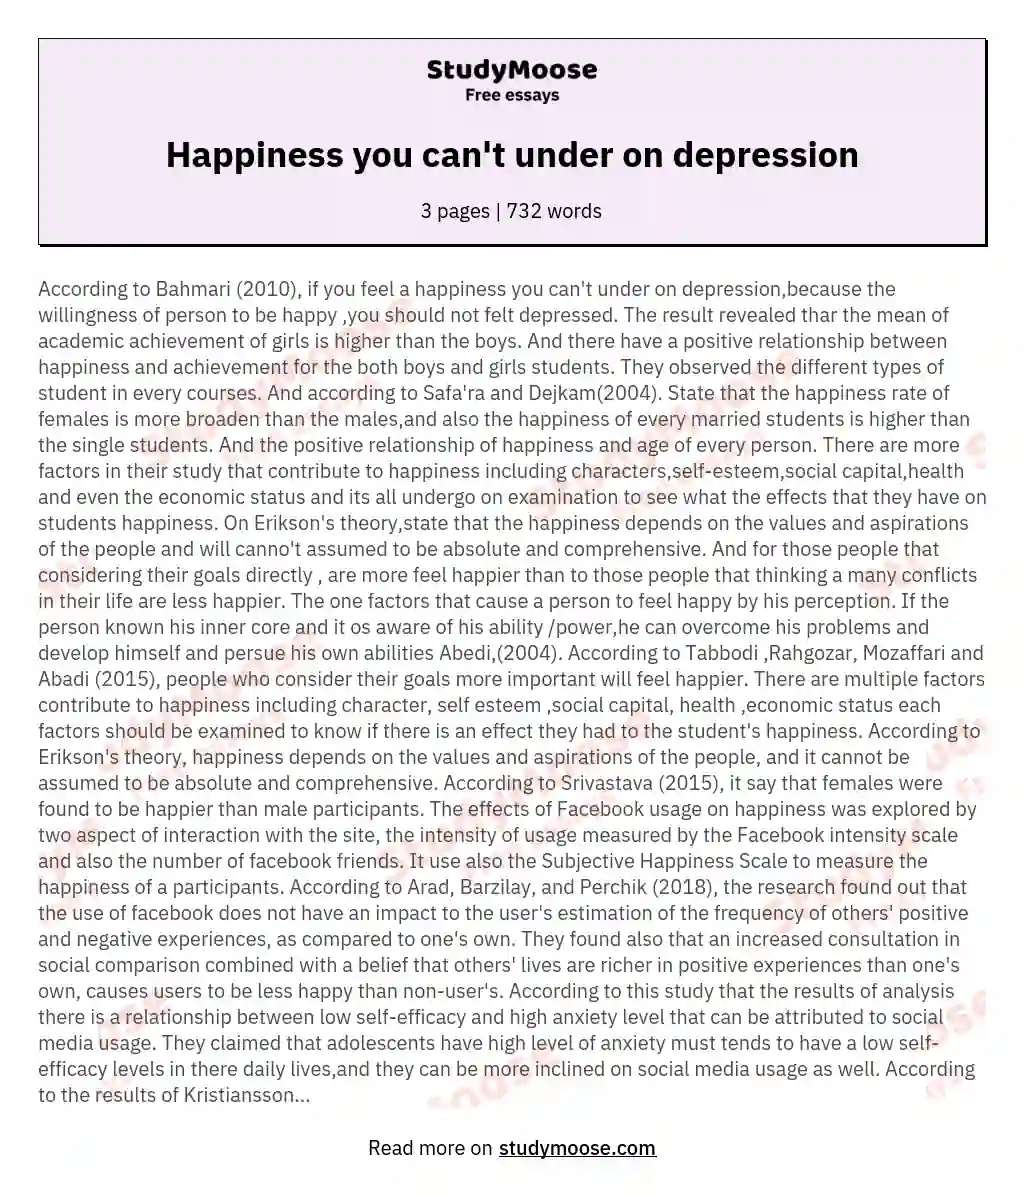 Happiness you can't under on depression essay